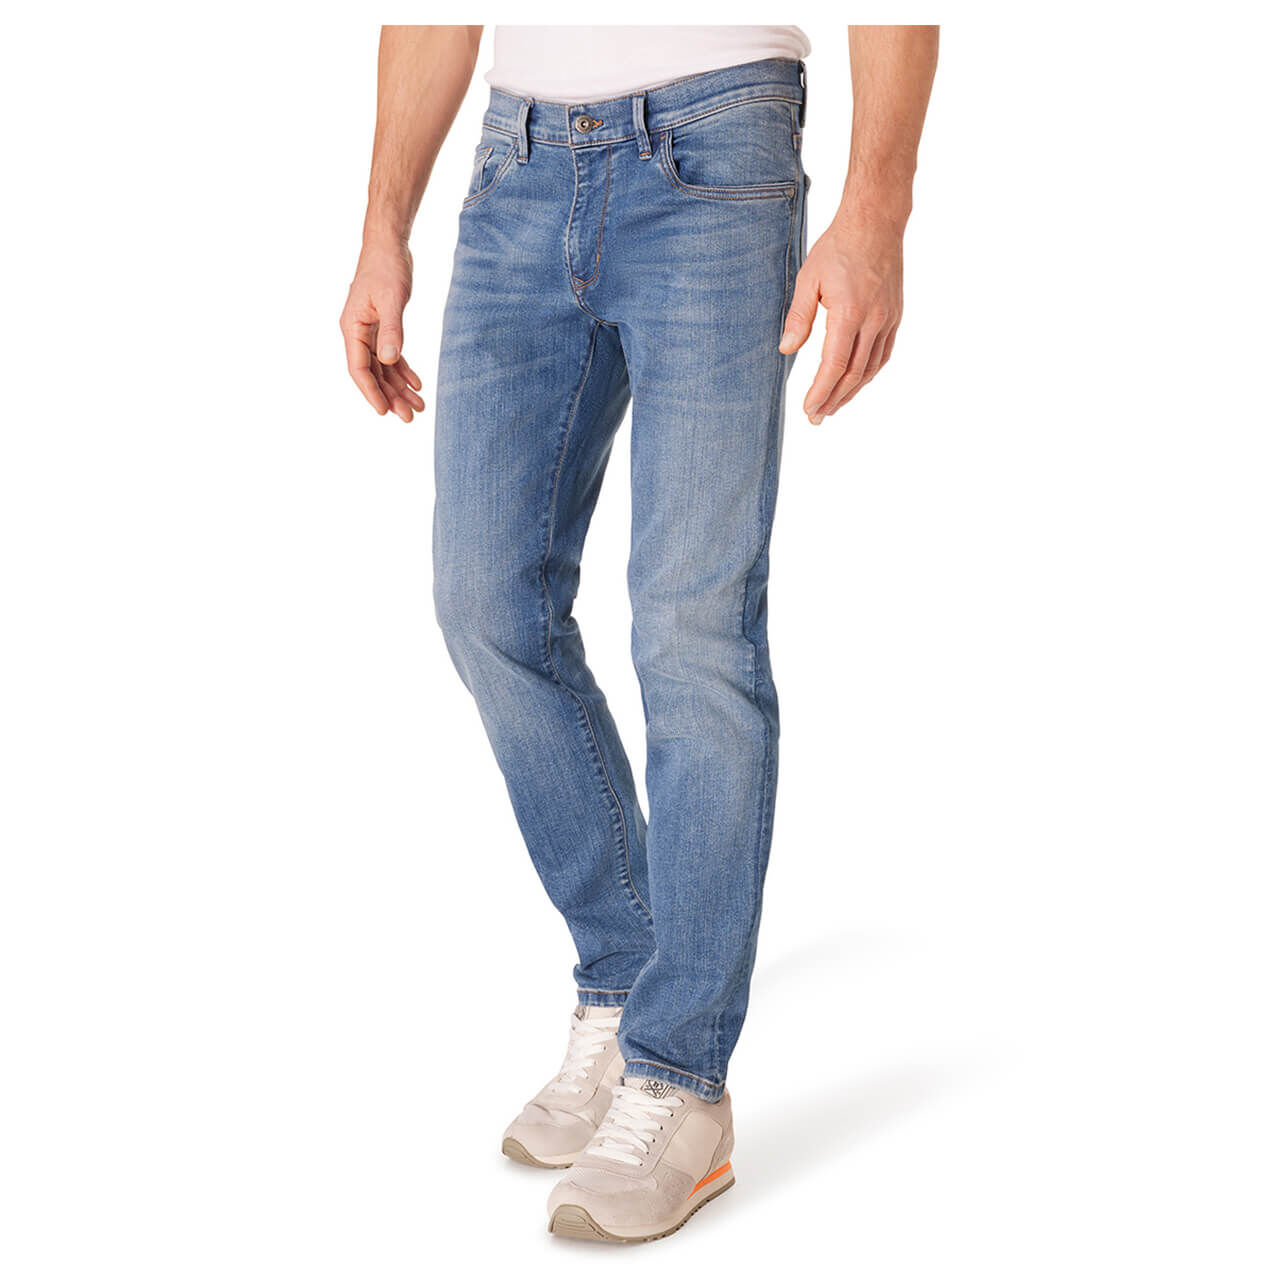 Pioneer Eric Jeans blue fashion